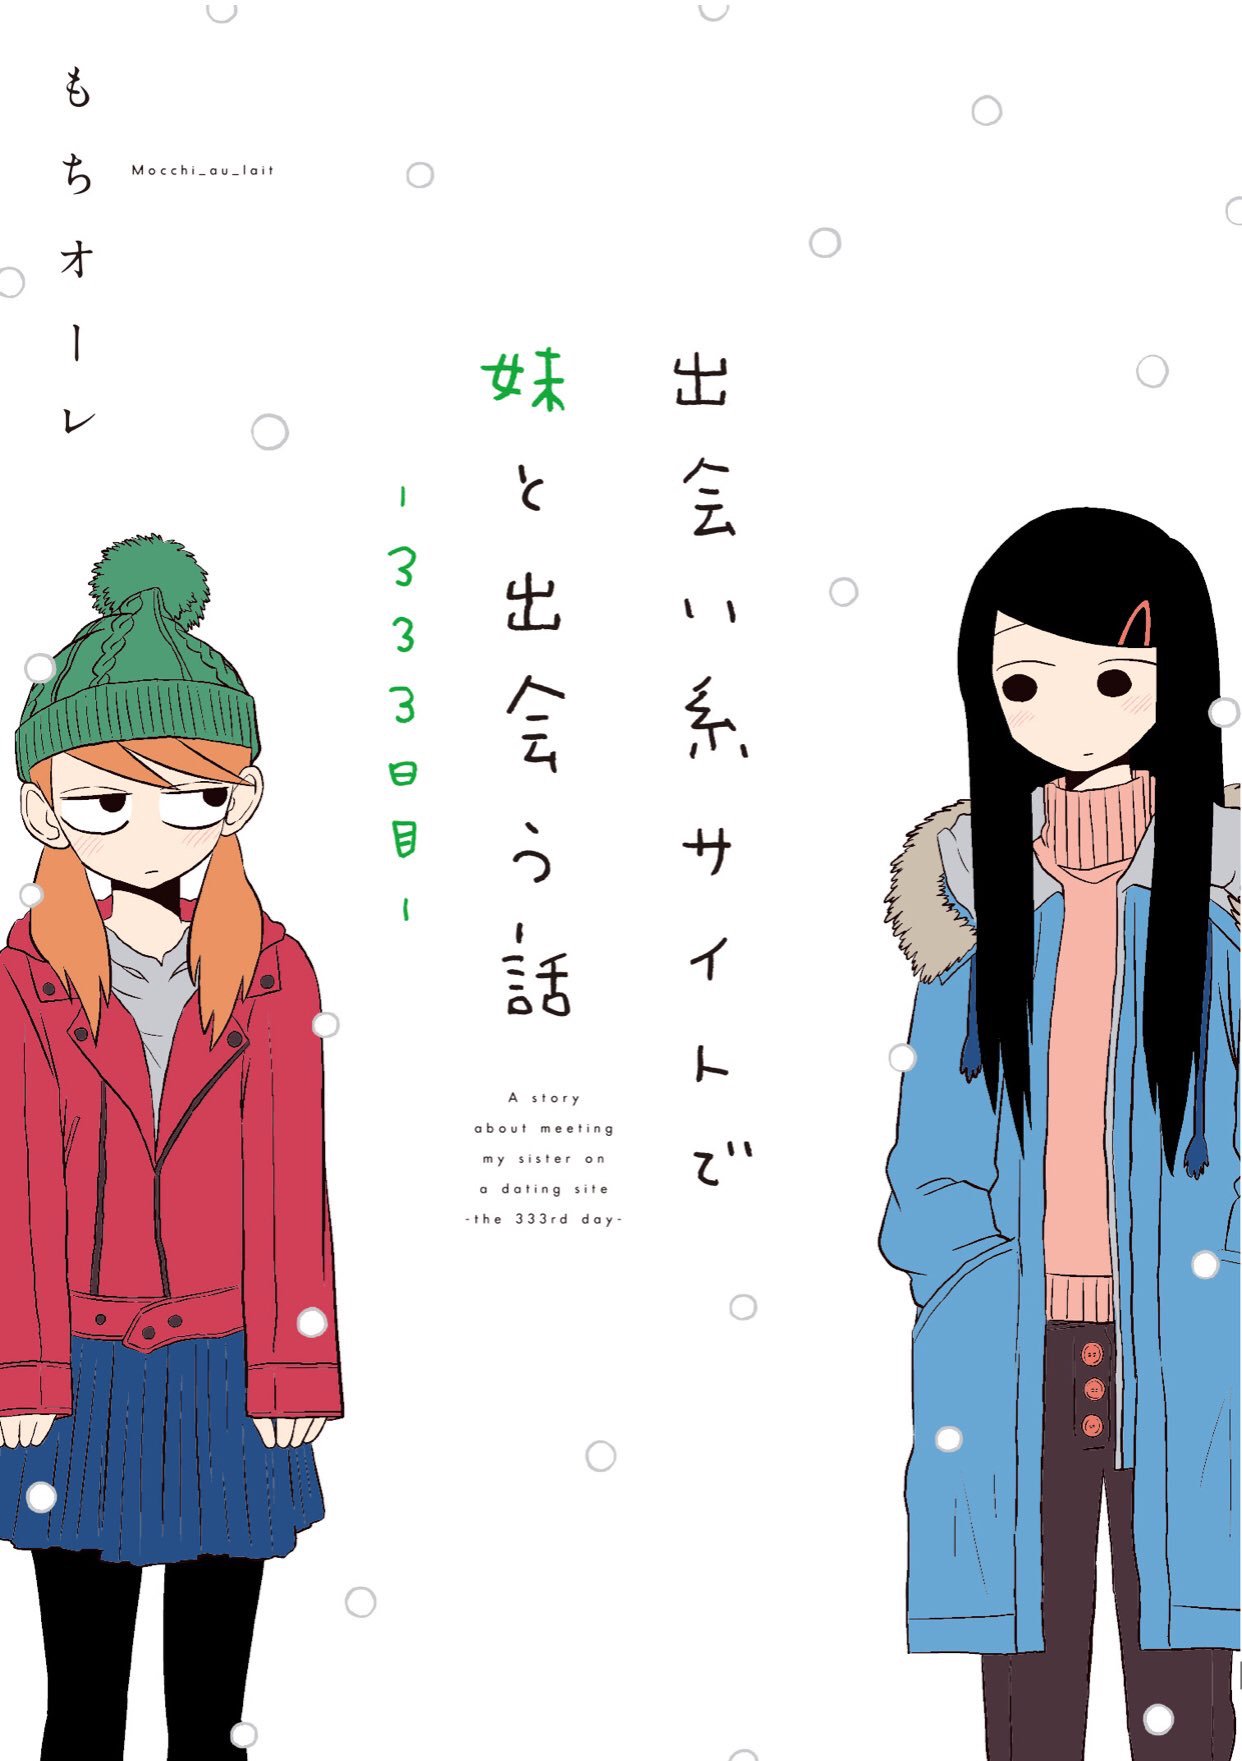 2girls beanie blush coat comic cover cover_page hair_ornament hairclip hands_in_pockets hat highres looking_at_another mochi_au_lait multiple_girls no_nose original siblings sisters skirt snowing sweater turtleneck turtleneck_sweater twintails